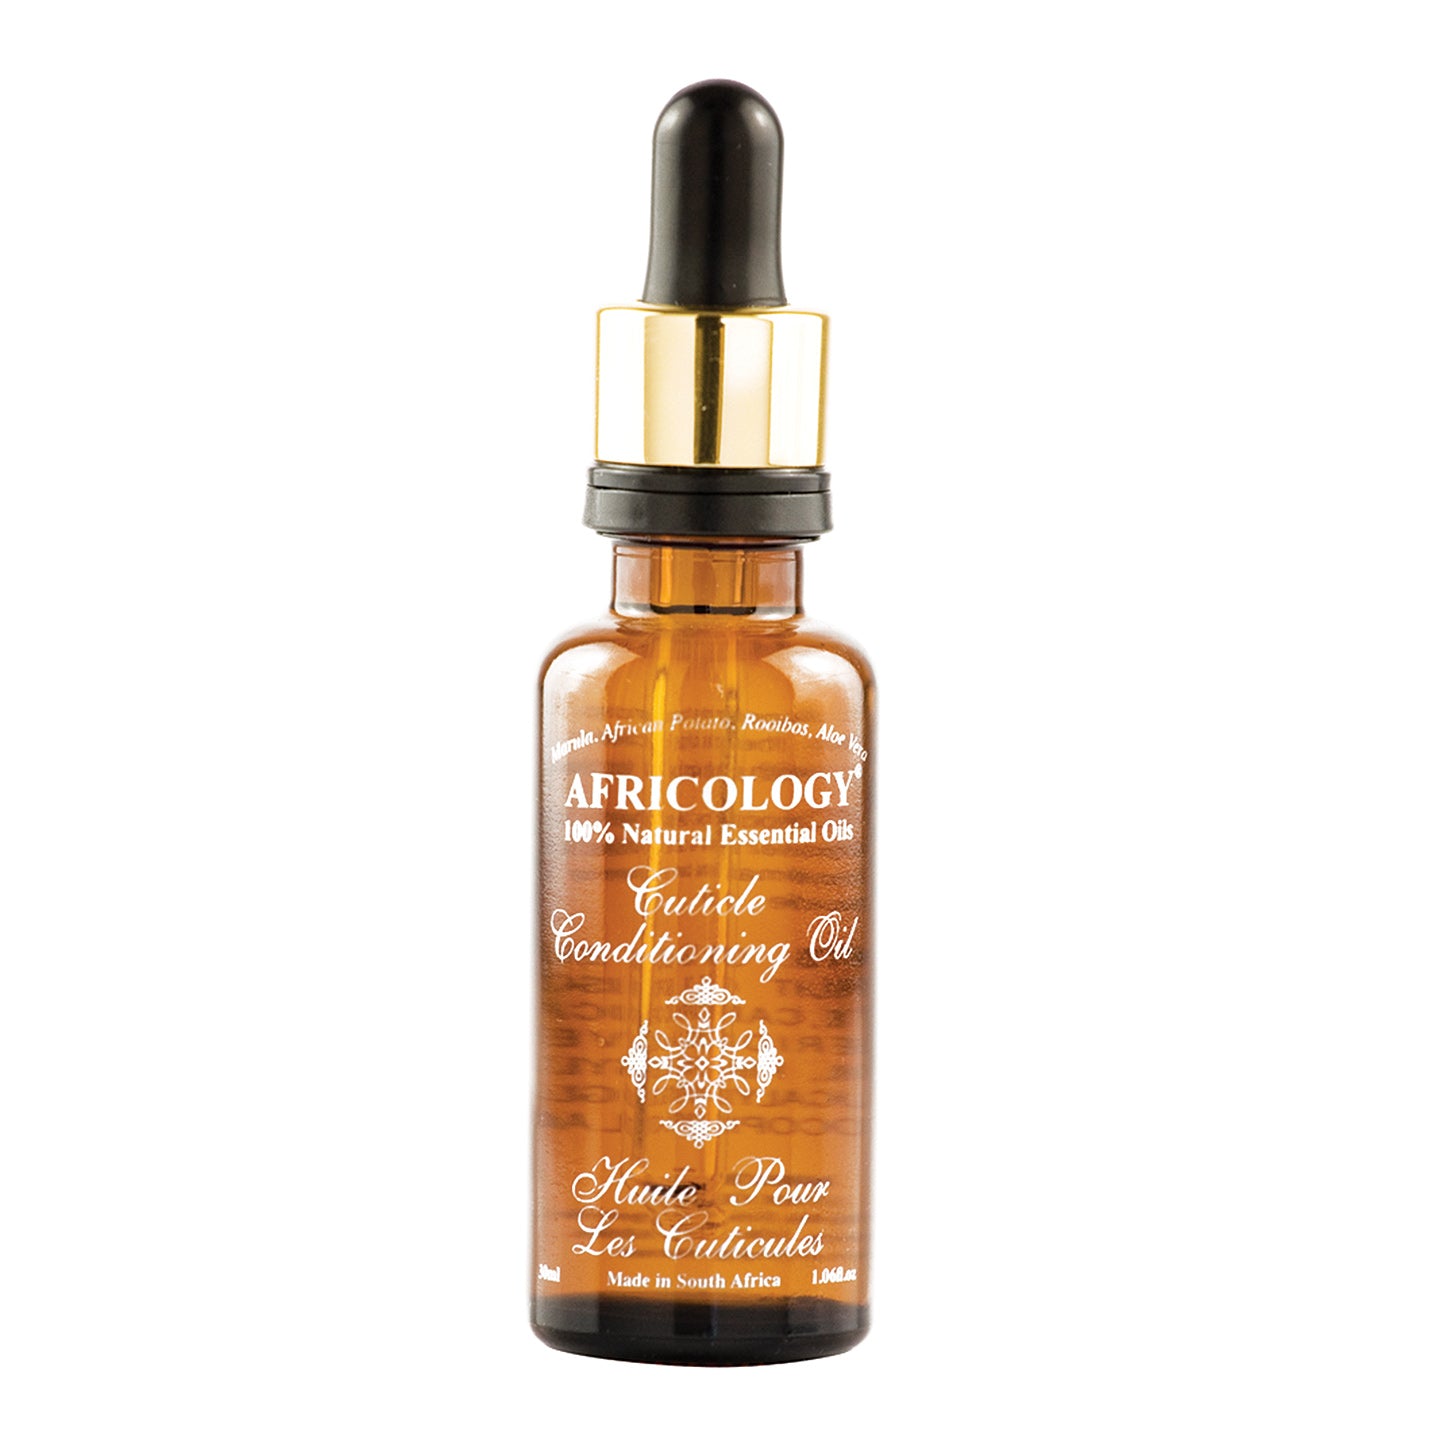 Africology Cuticle Conditioning Oil